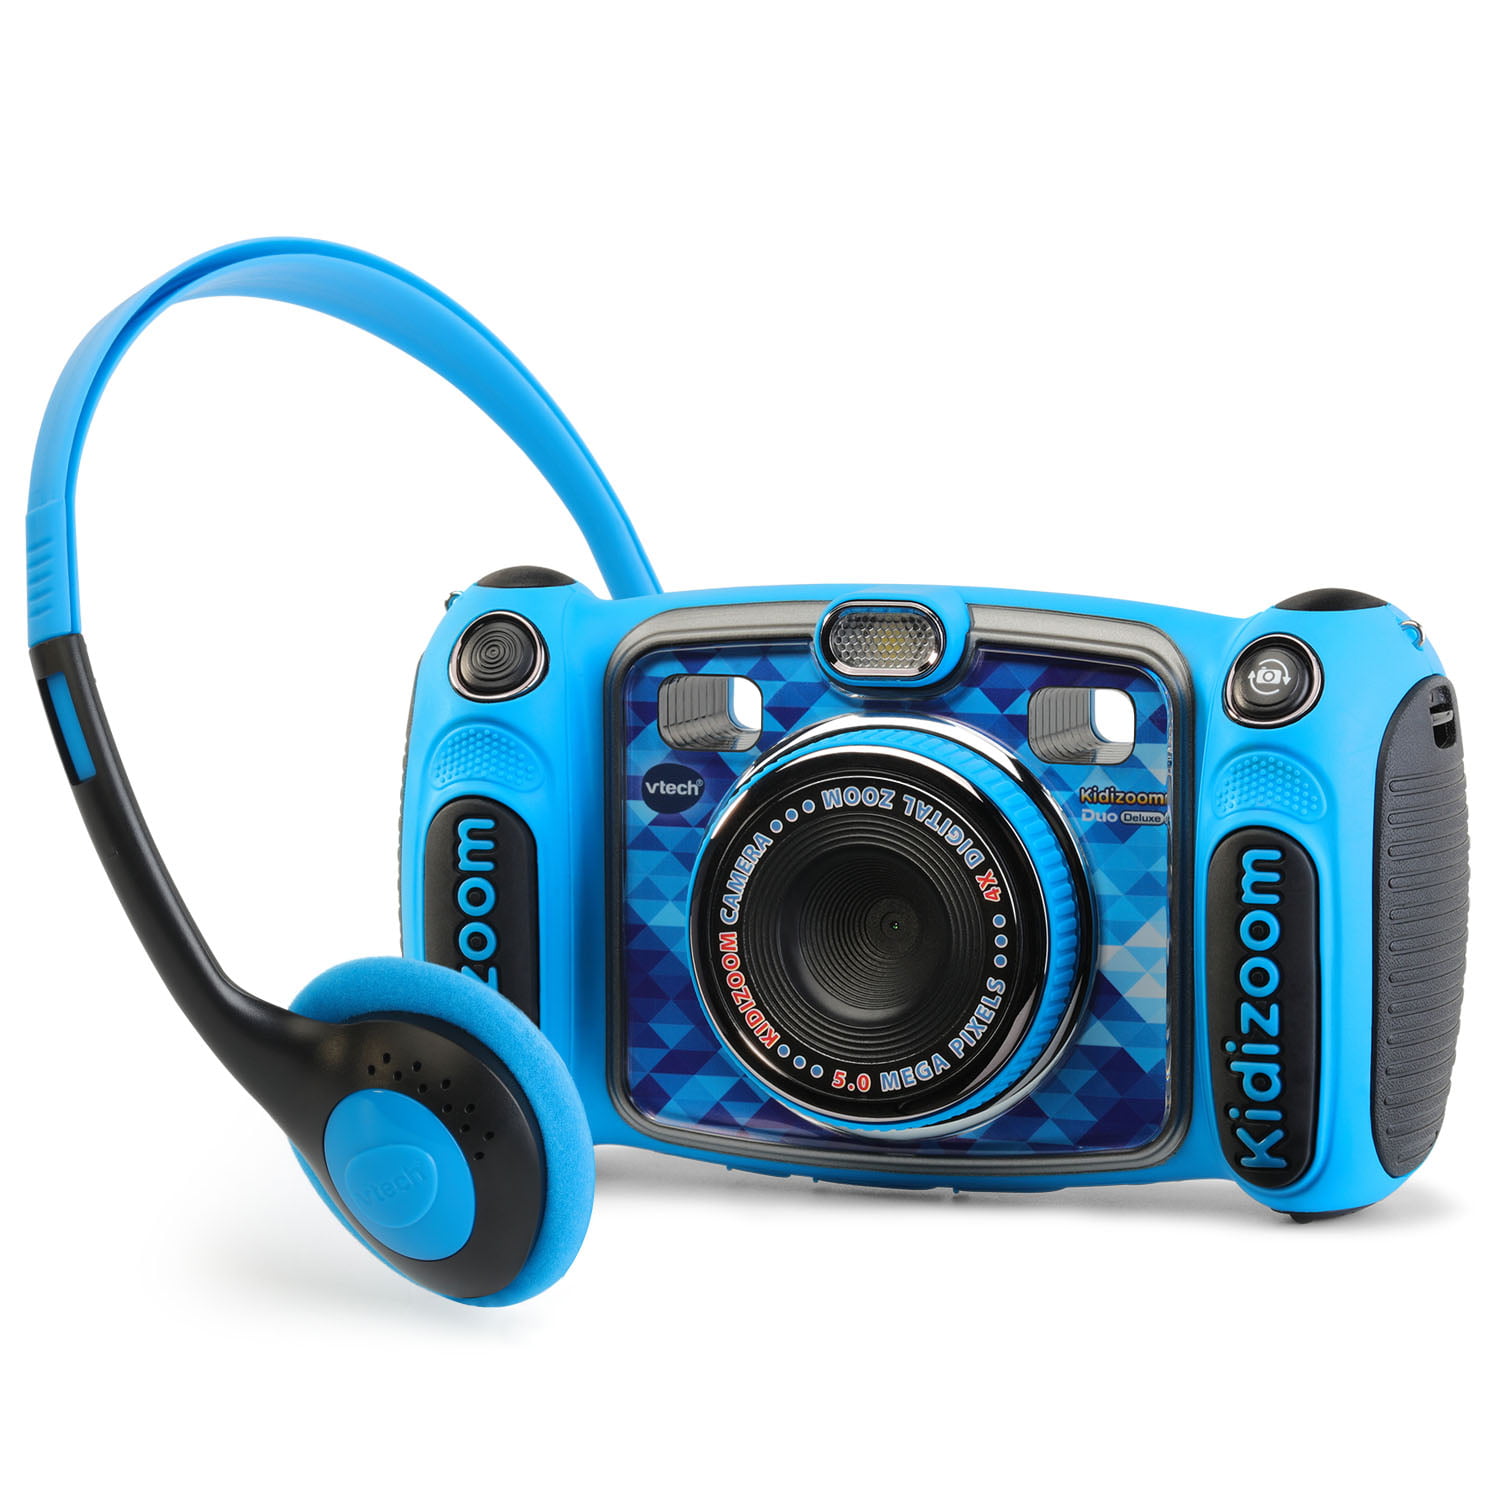 VTech Kidizoom Duo Deluxe Camera (Blue), 53% OFF